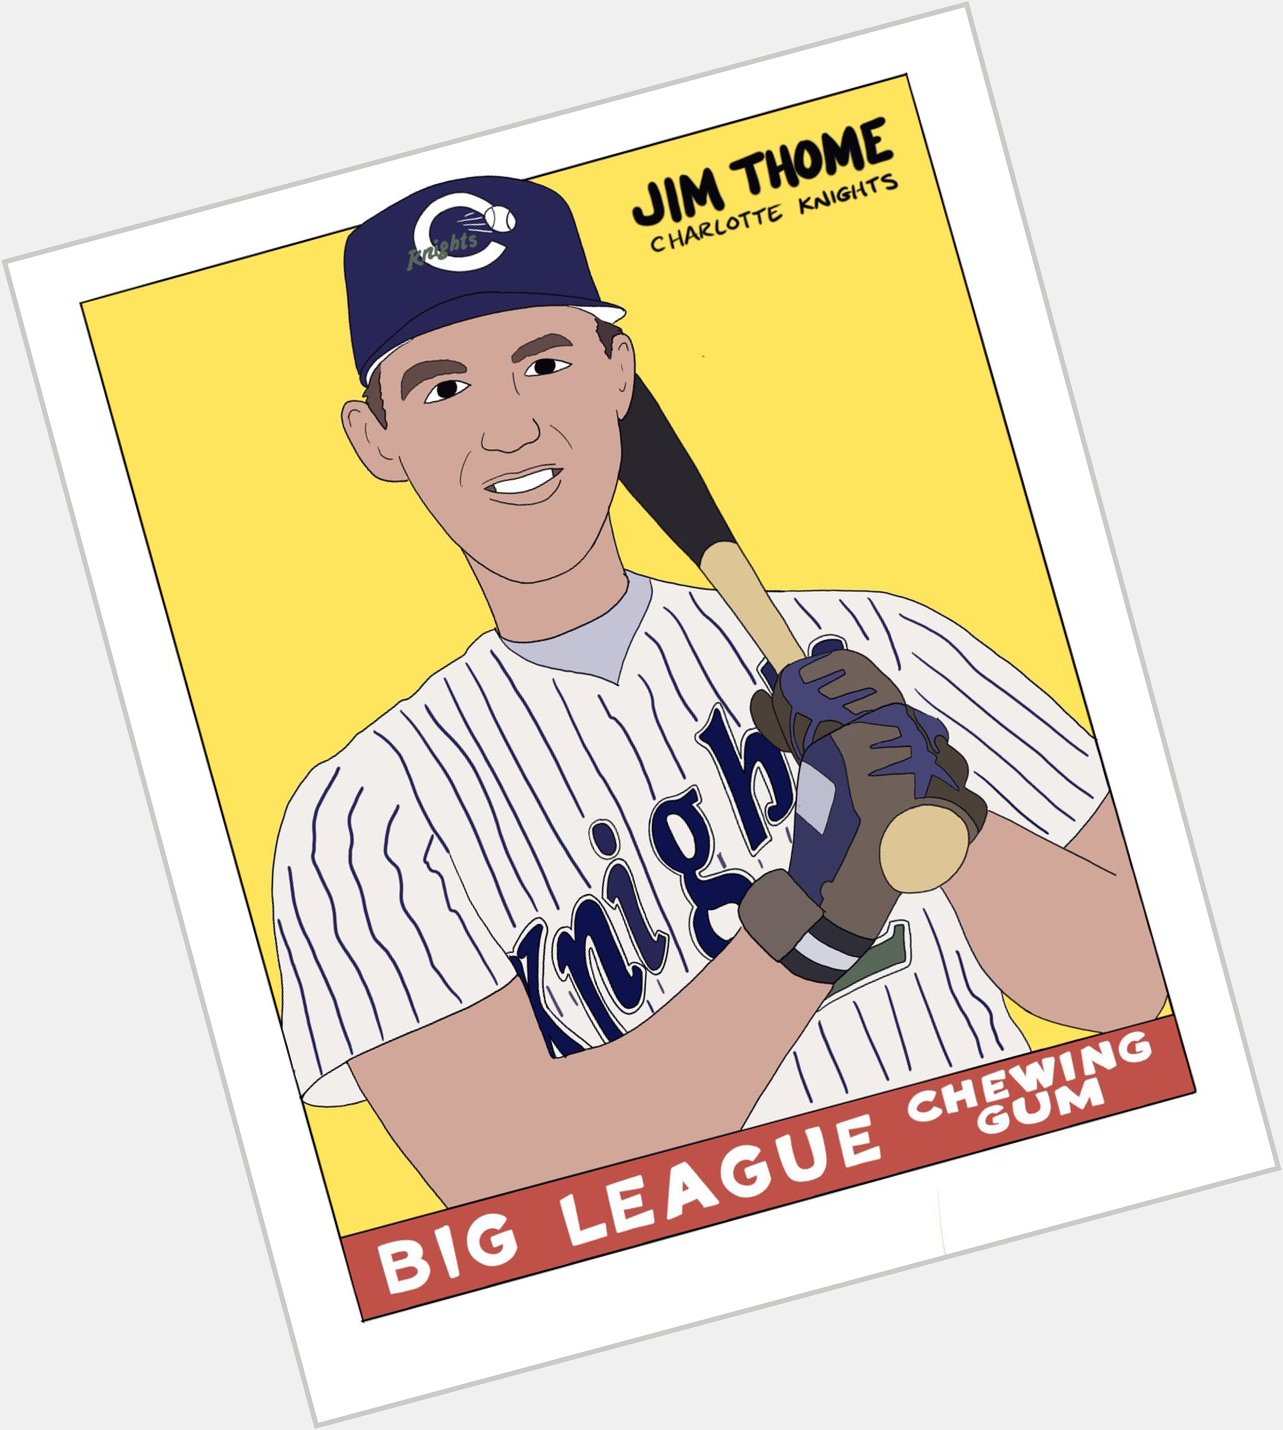 Happy Birthday Jim Thome, Buddy Bell, and Luis Tiant s dad! 